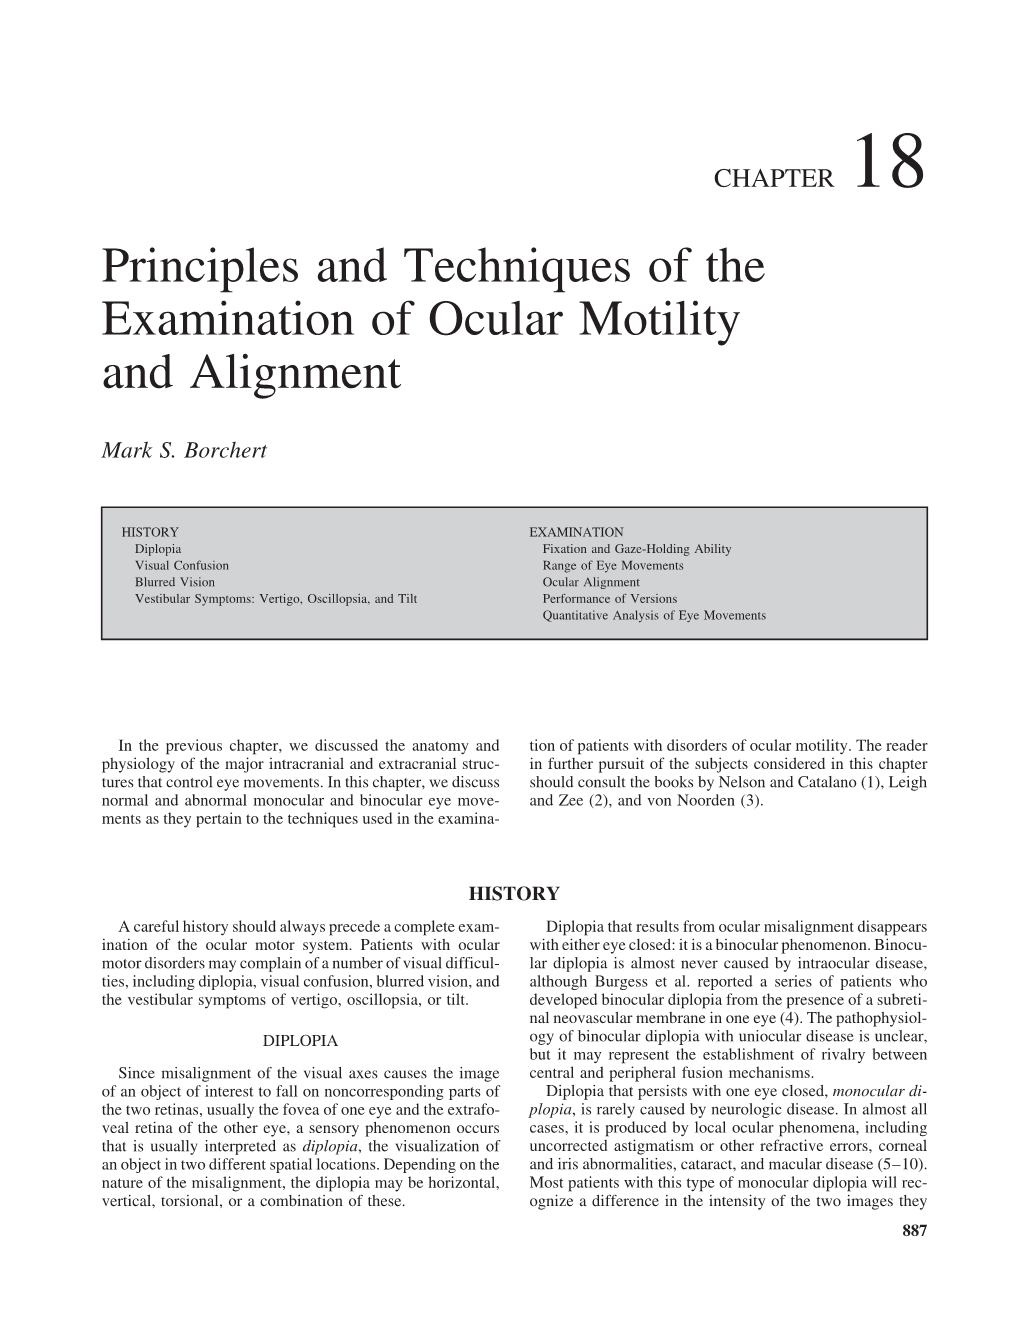 Principles and Techniques of the Examination of Ocular Motility and Alignment